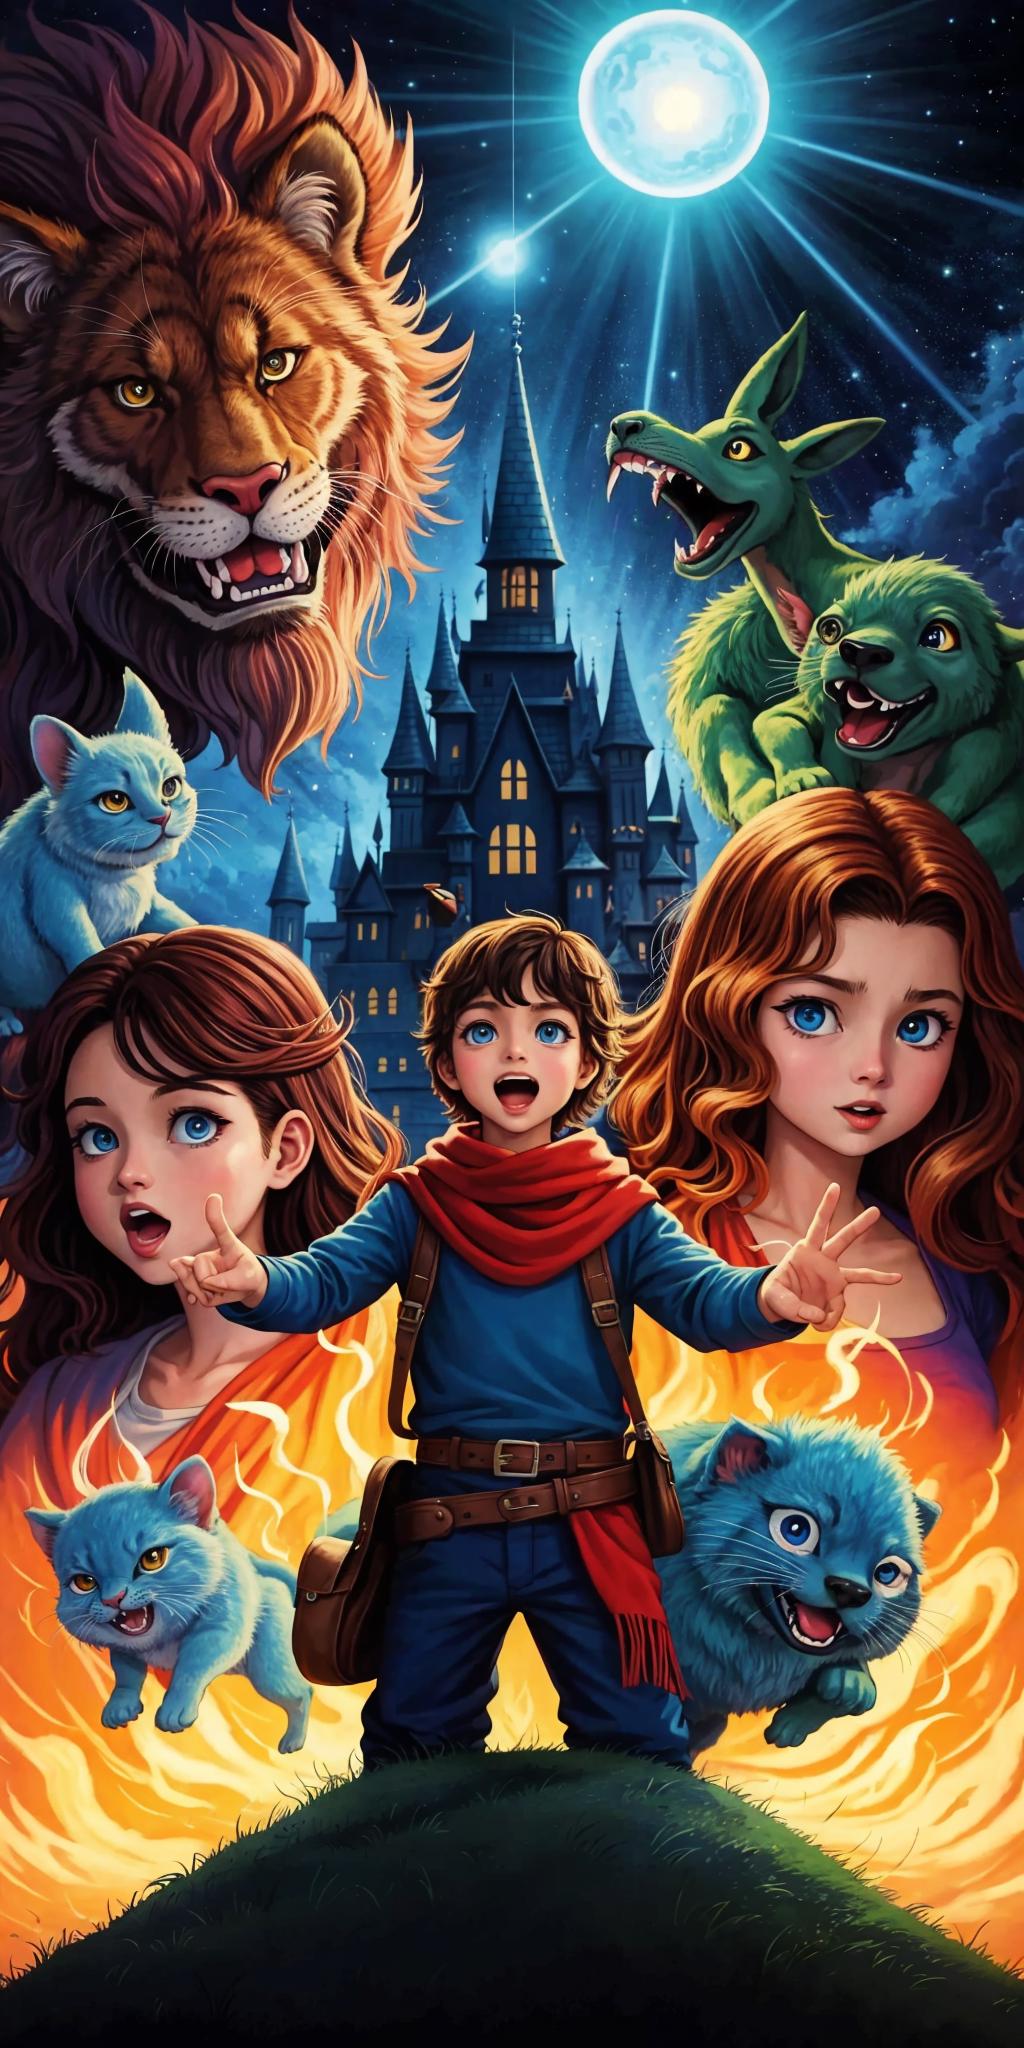 A Fantasy Artwork Featuring a Boy and Two Girls with Animals and a Castle in the Background